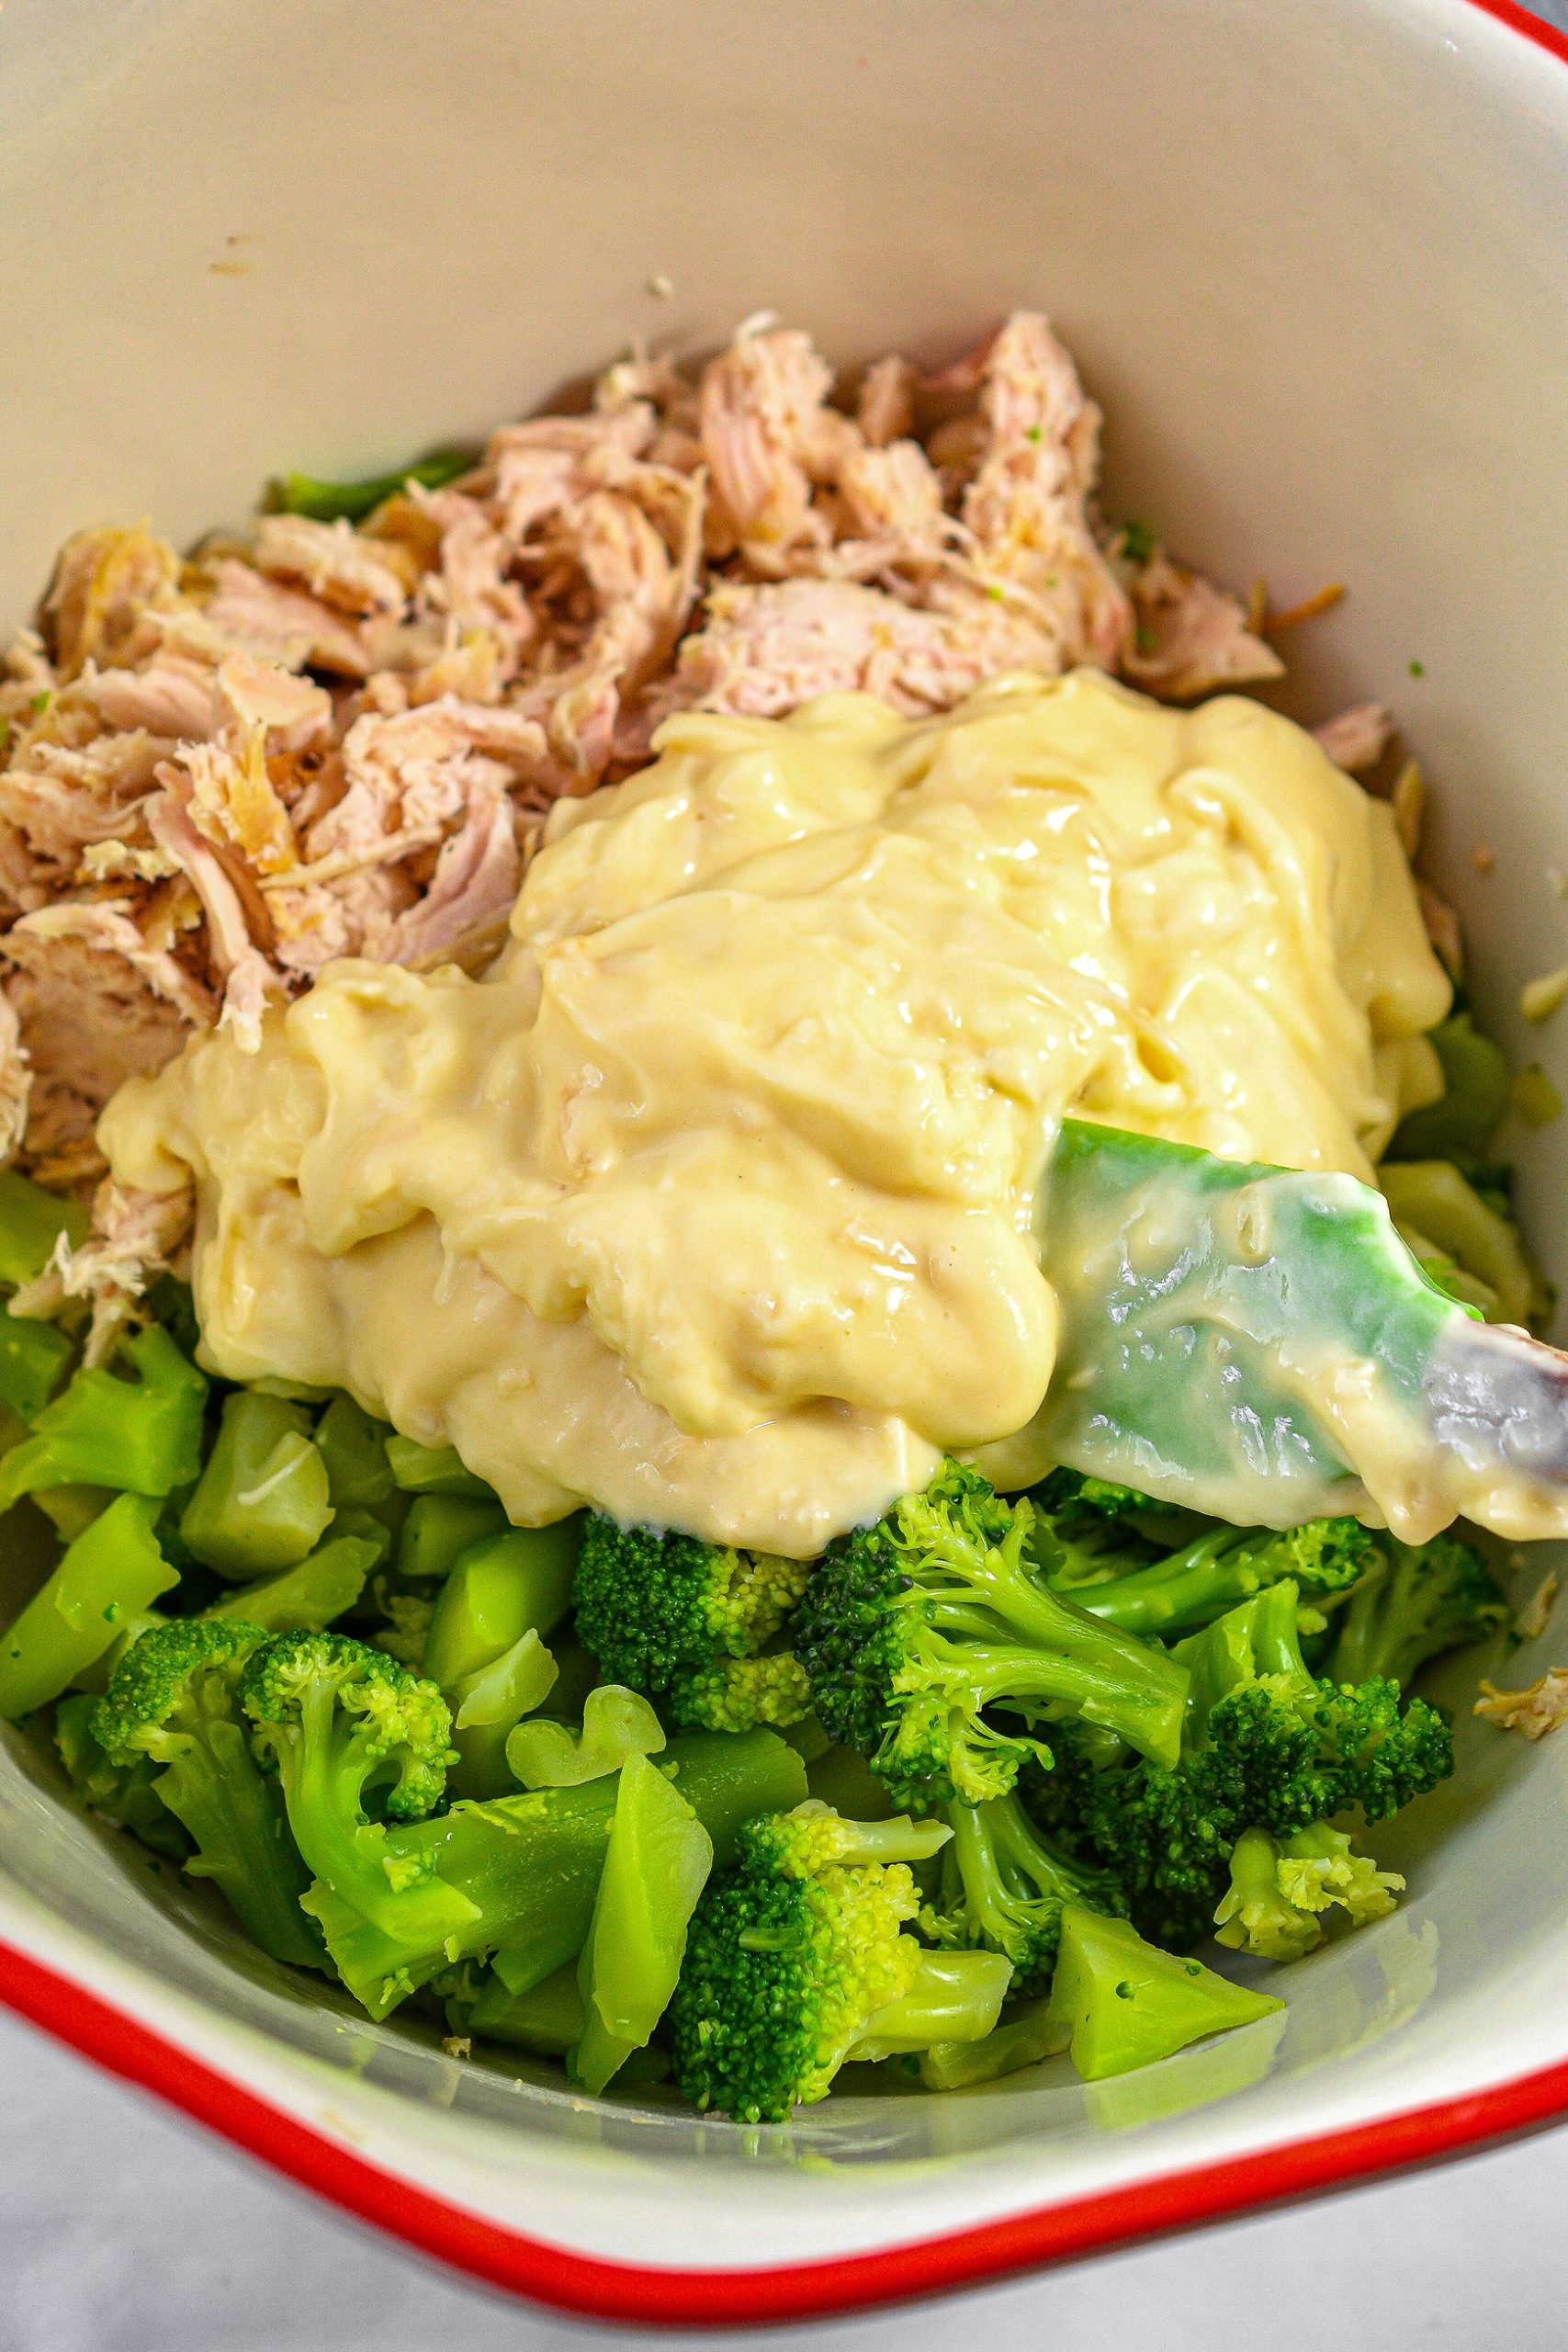 In a large mixing bowl, combine the shredded chicken and broccoli.